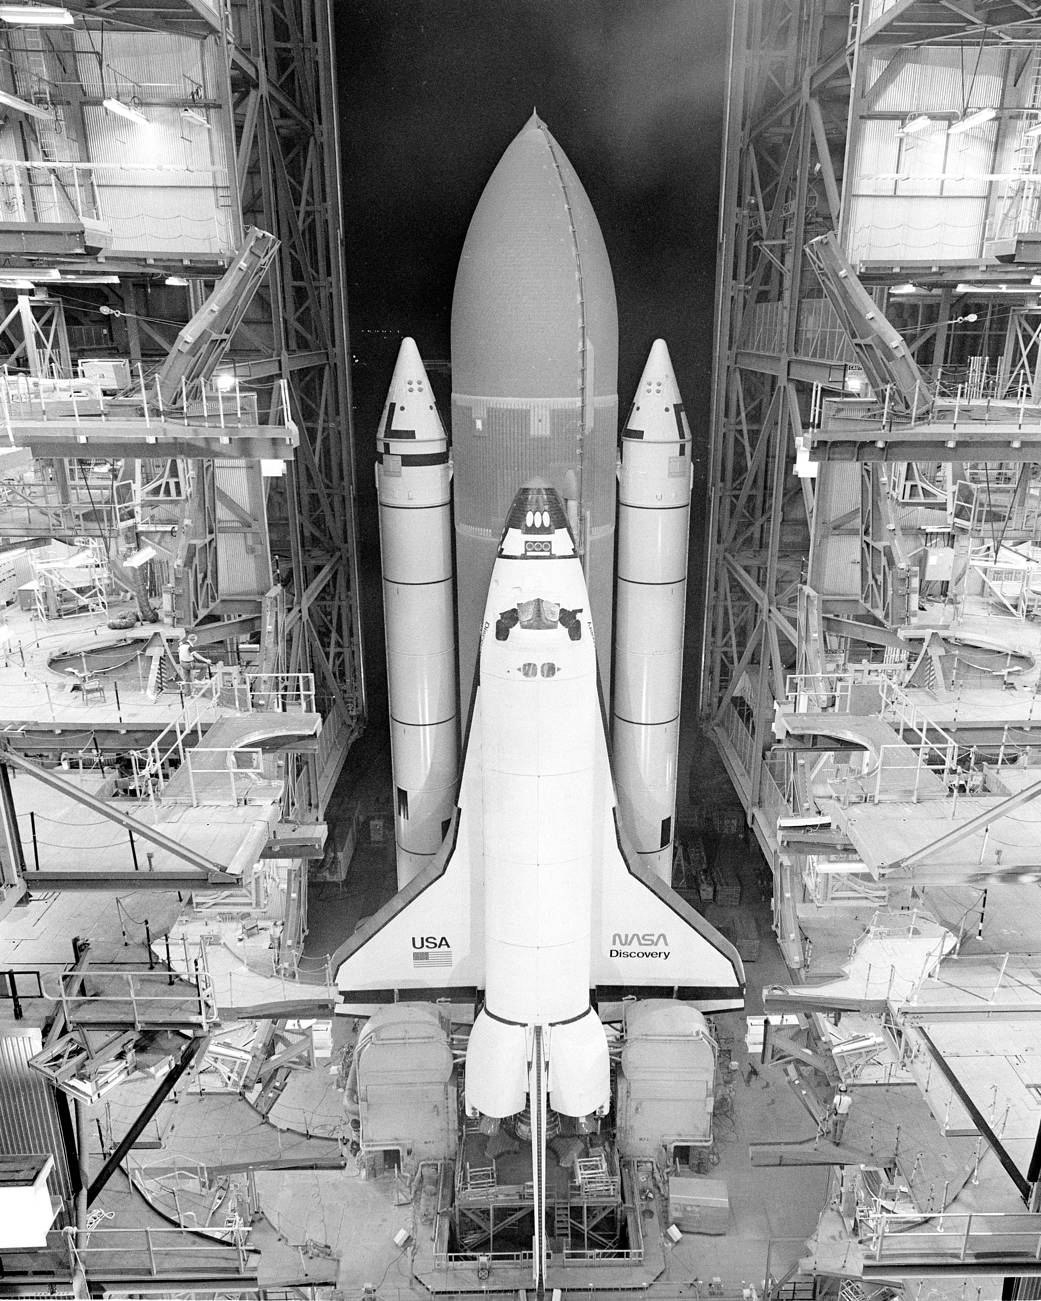 This week in 1984, space shuttle Discovery and STS-41D launched from Kennedy Space Center. 